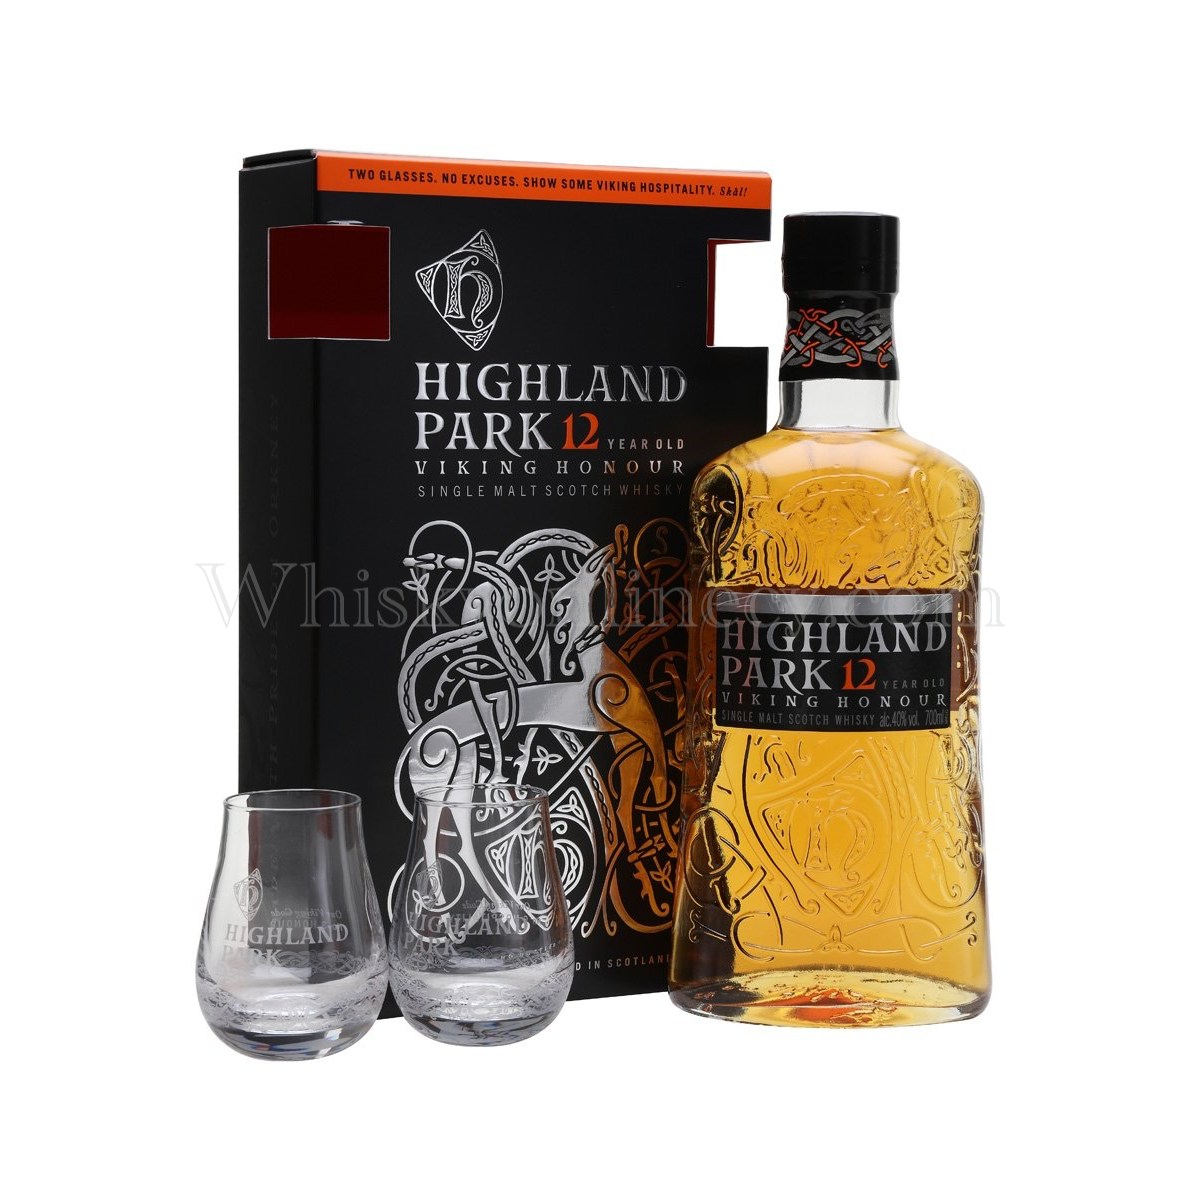 Whisky Online Cyprus - Highland Park 12 Year Old Viking Honour Gift Pack  (70cl, 40%)